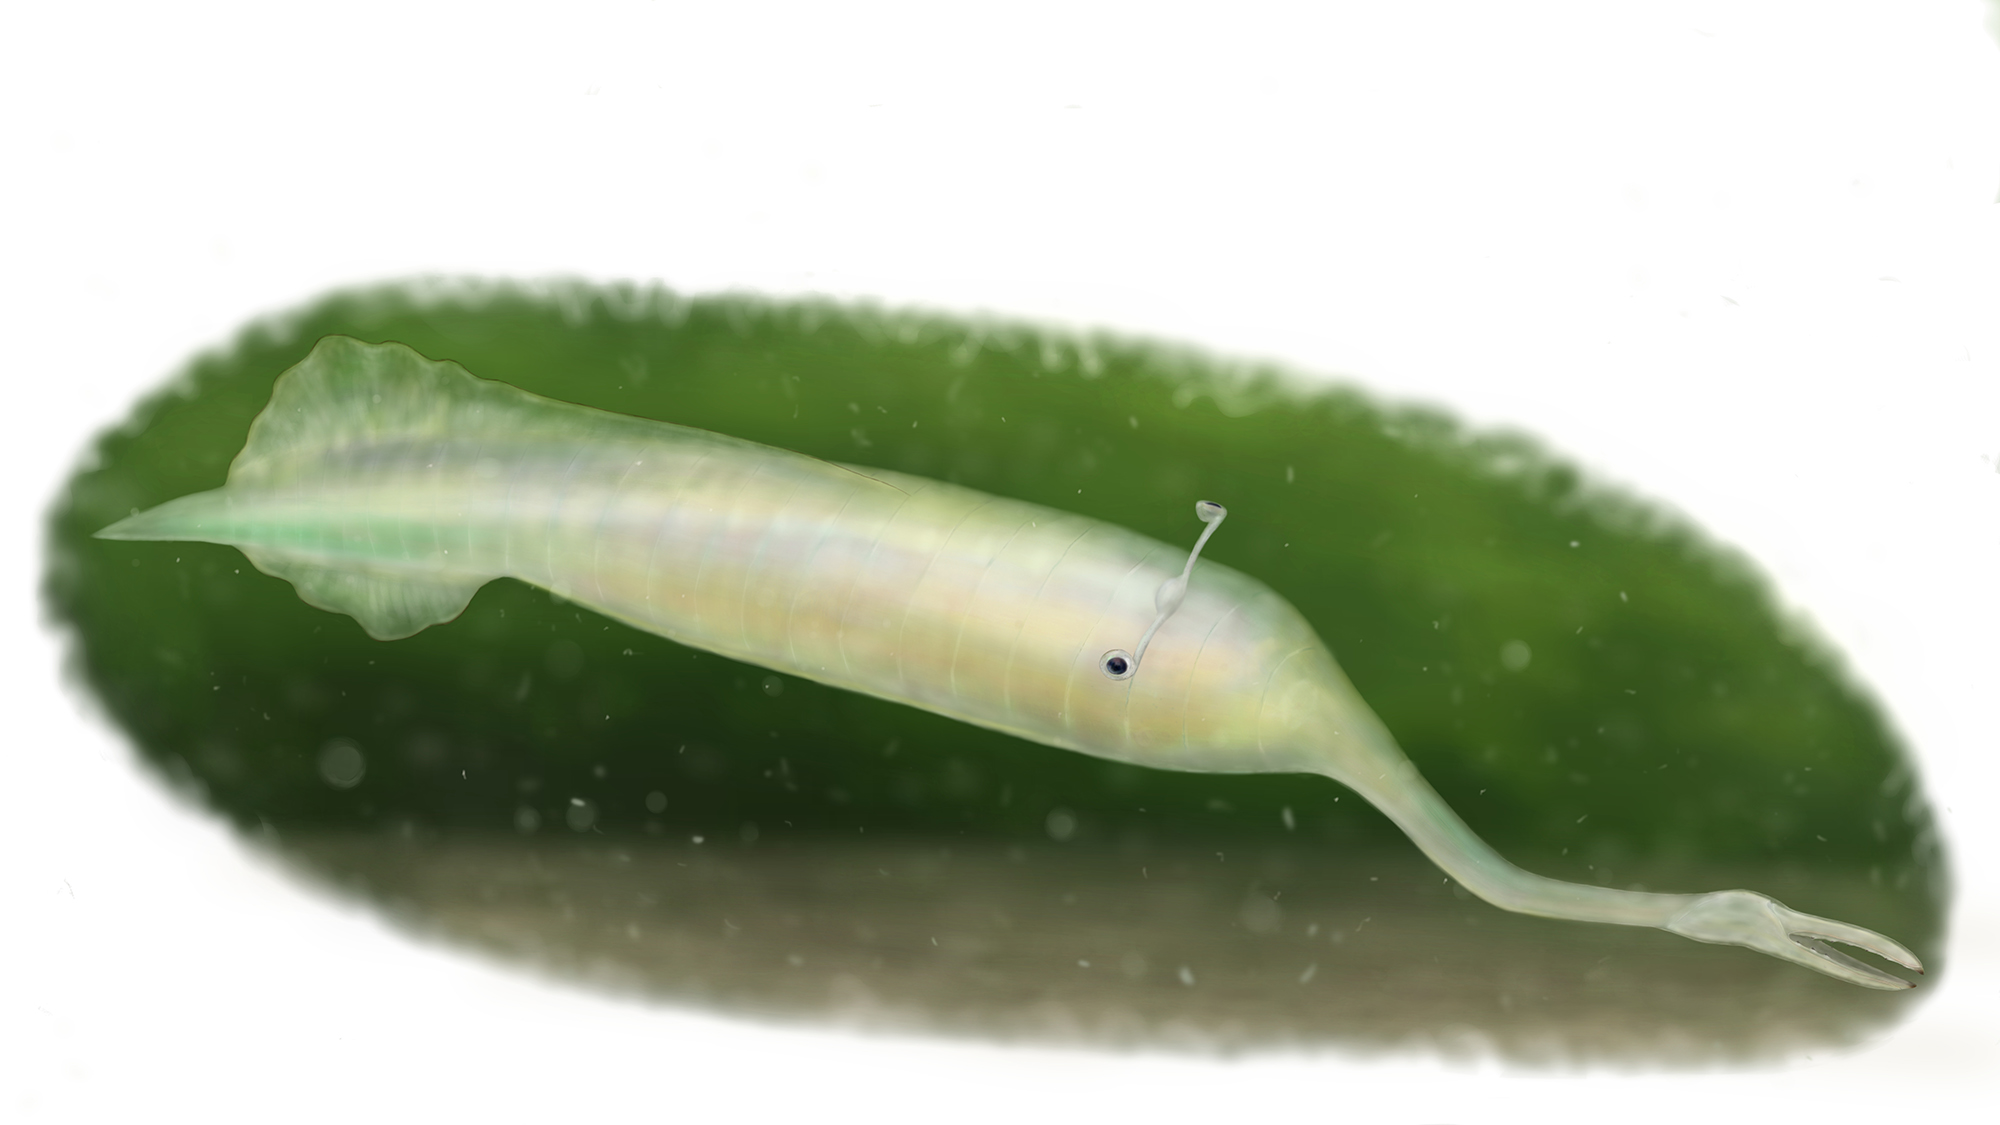 Illustration in a soft painting style of how the Tully monster may have looked when it lived underwater.